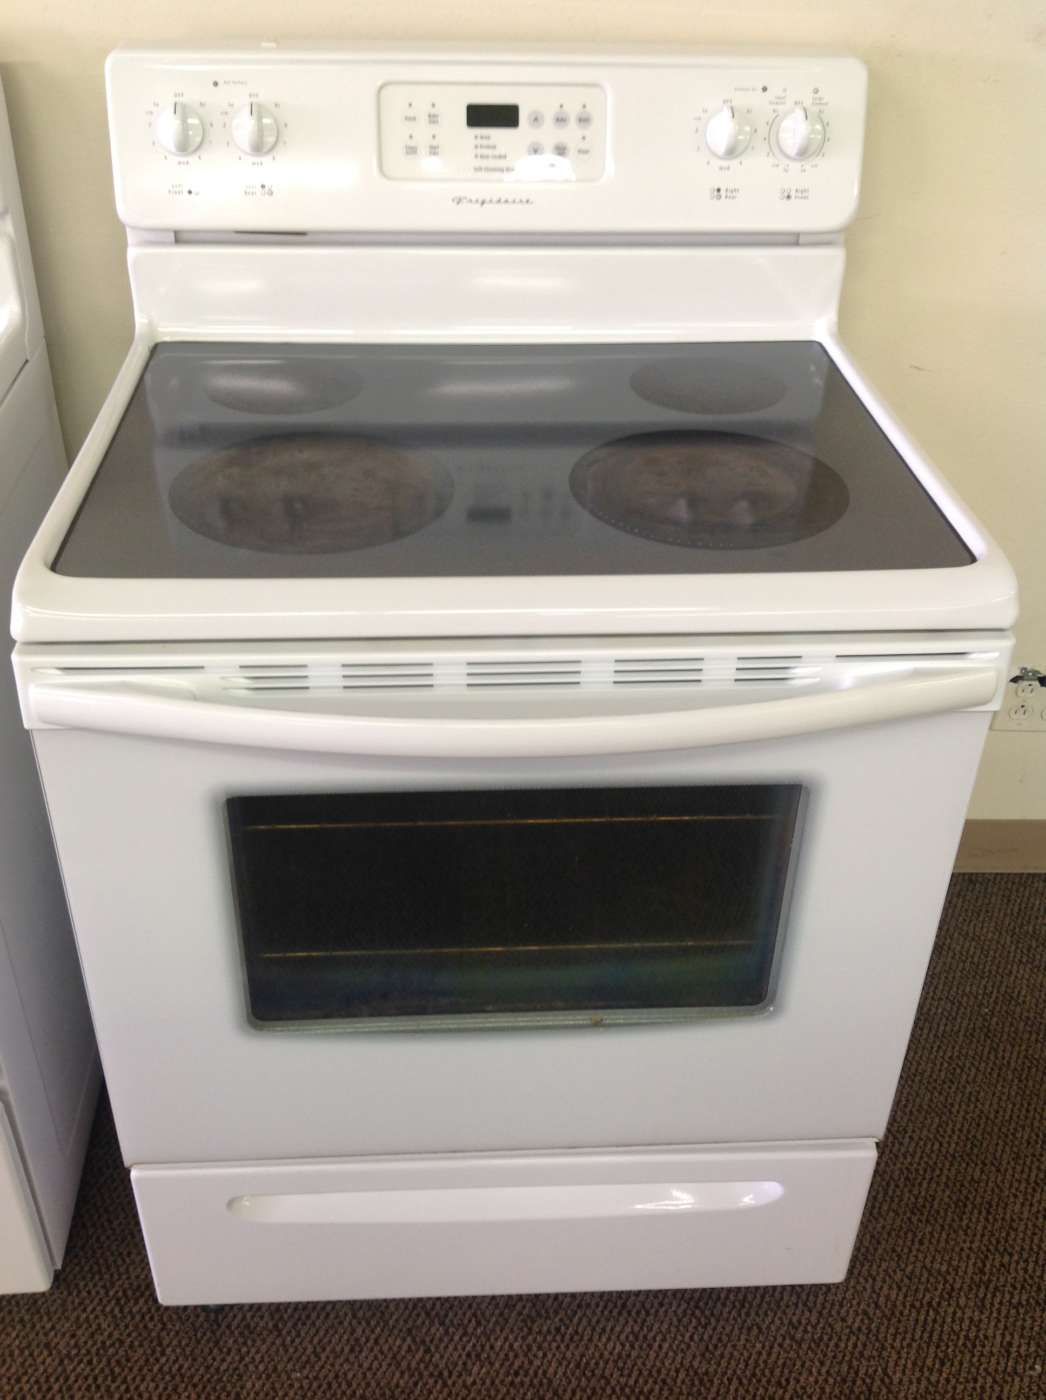 Used FRIGIDAIRE Self-Clean Electric Range – White